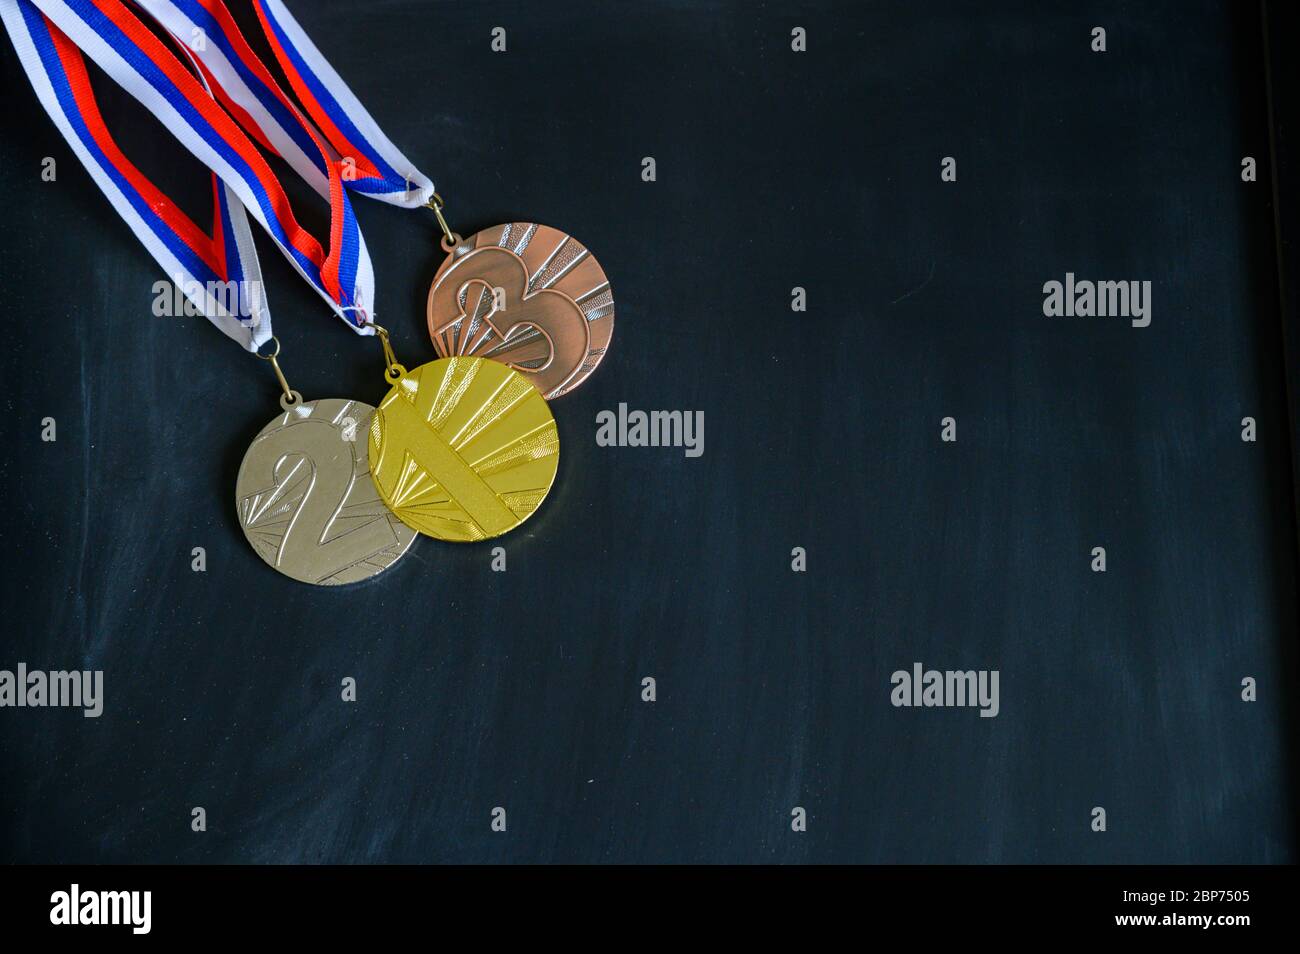 Gold, silver and bronze medal. Medal set on black background, sport photo, black edit space Stock Photo